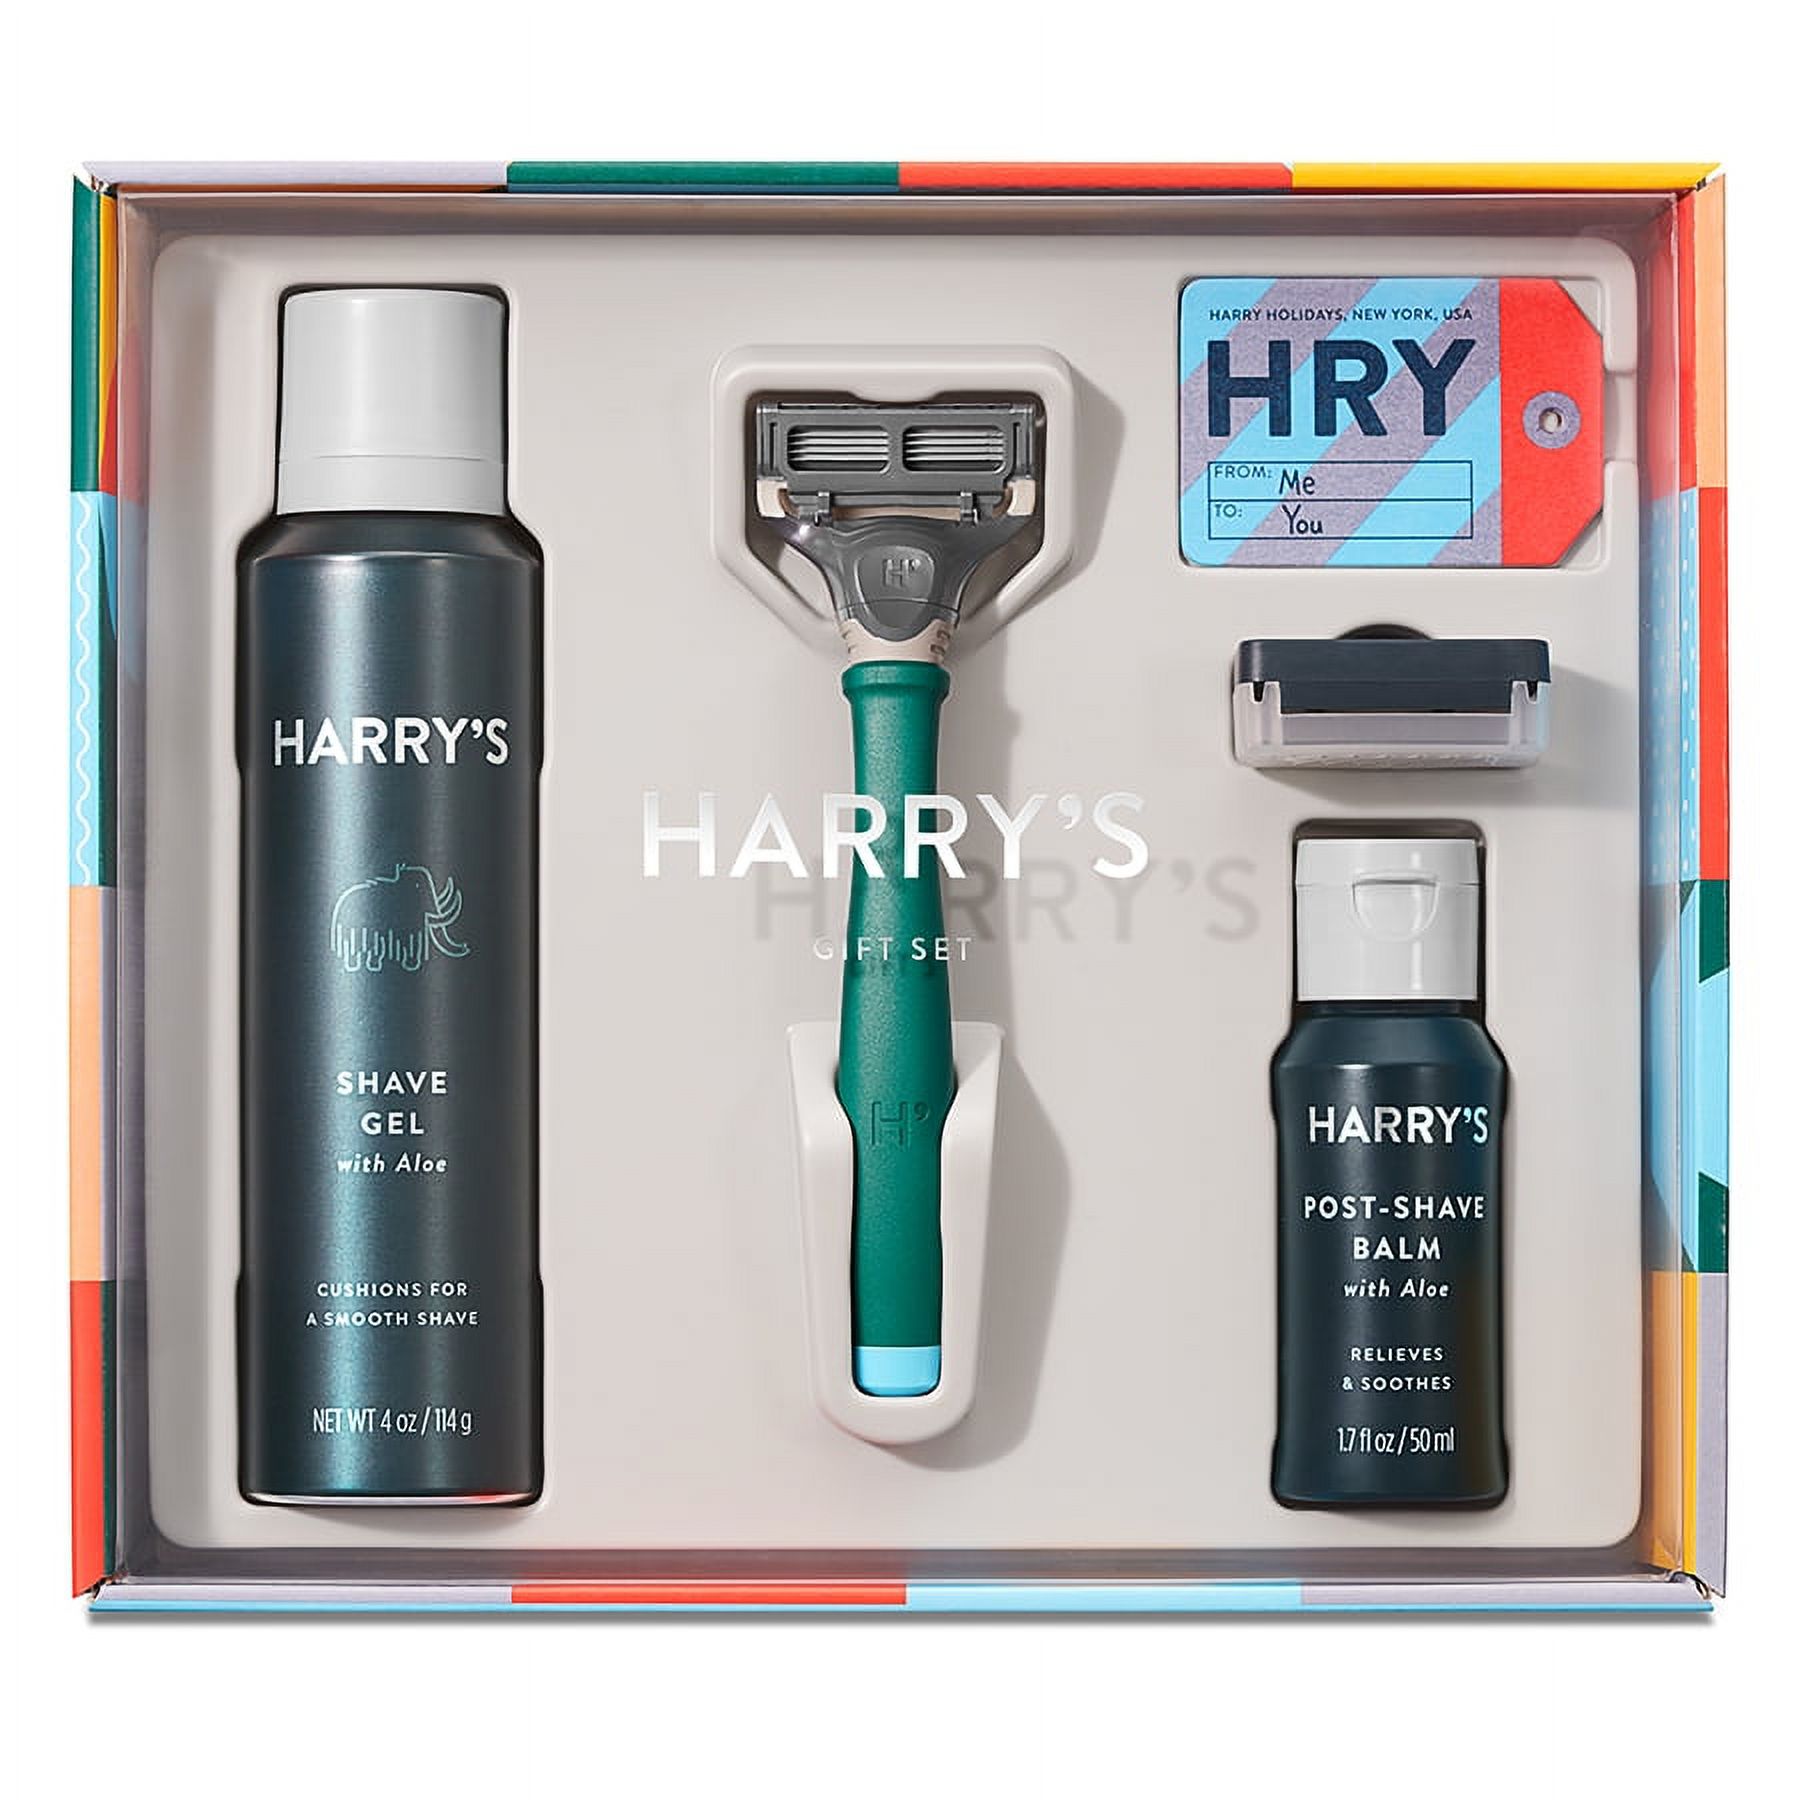 Harry's 2019 Holiday Men's Shave Set including 1 Razor and Blades, 1 Post-Shave Balm, 1 Shave Gel and a Travel Cap - image 1 of 4